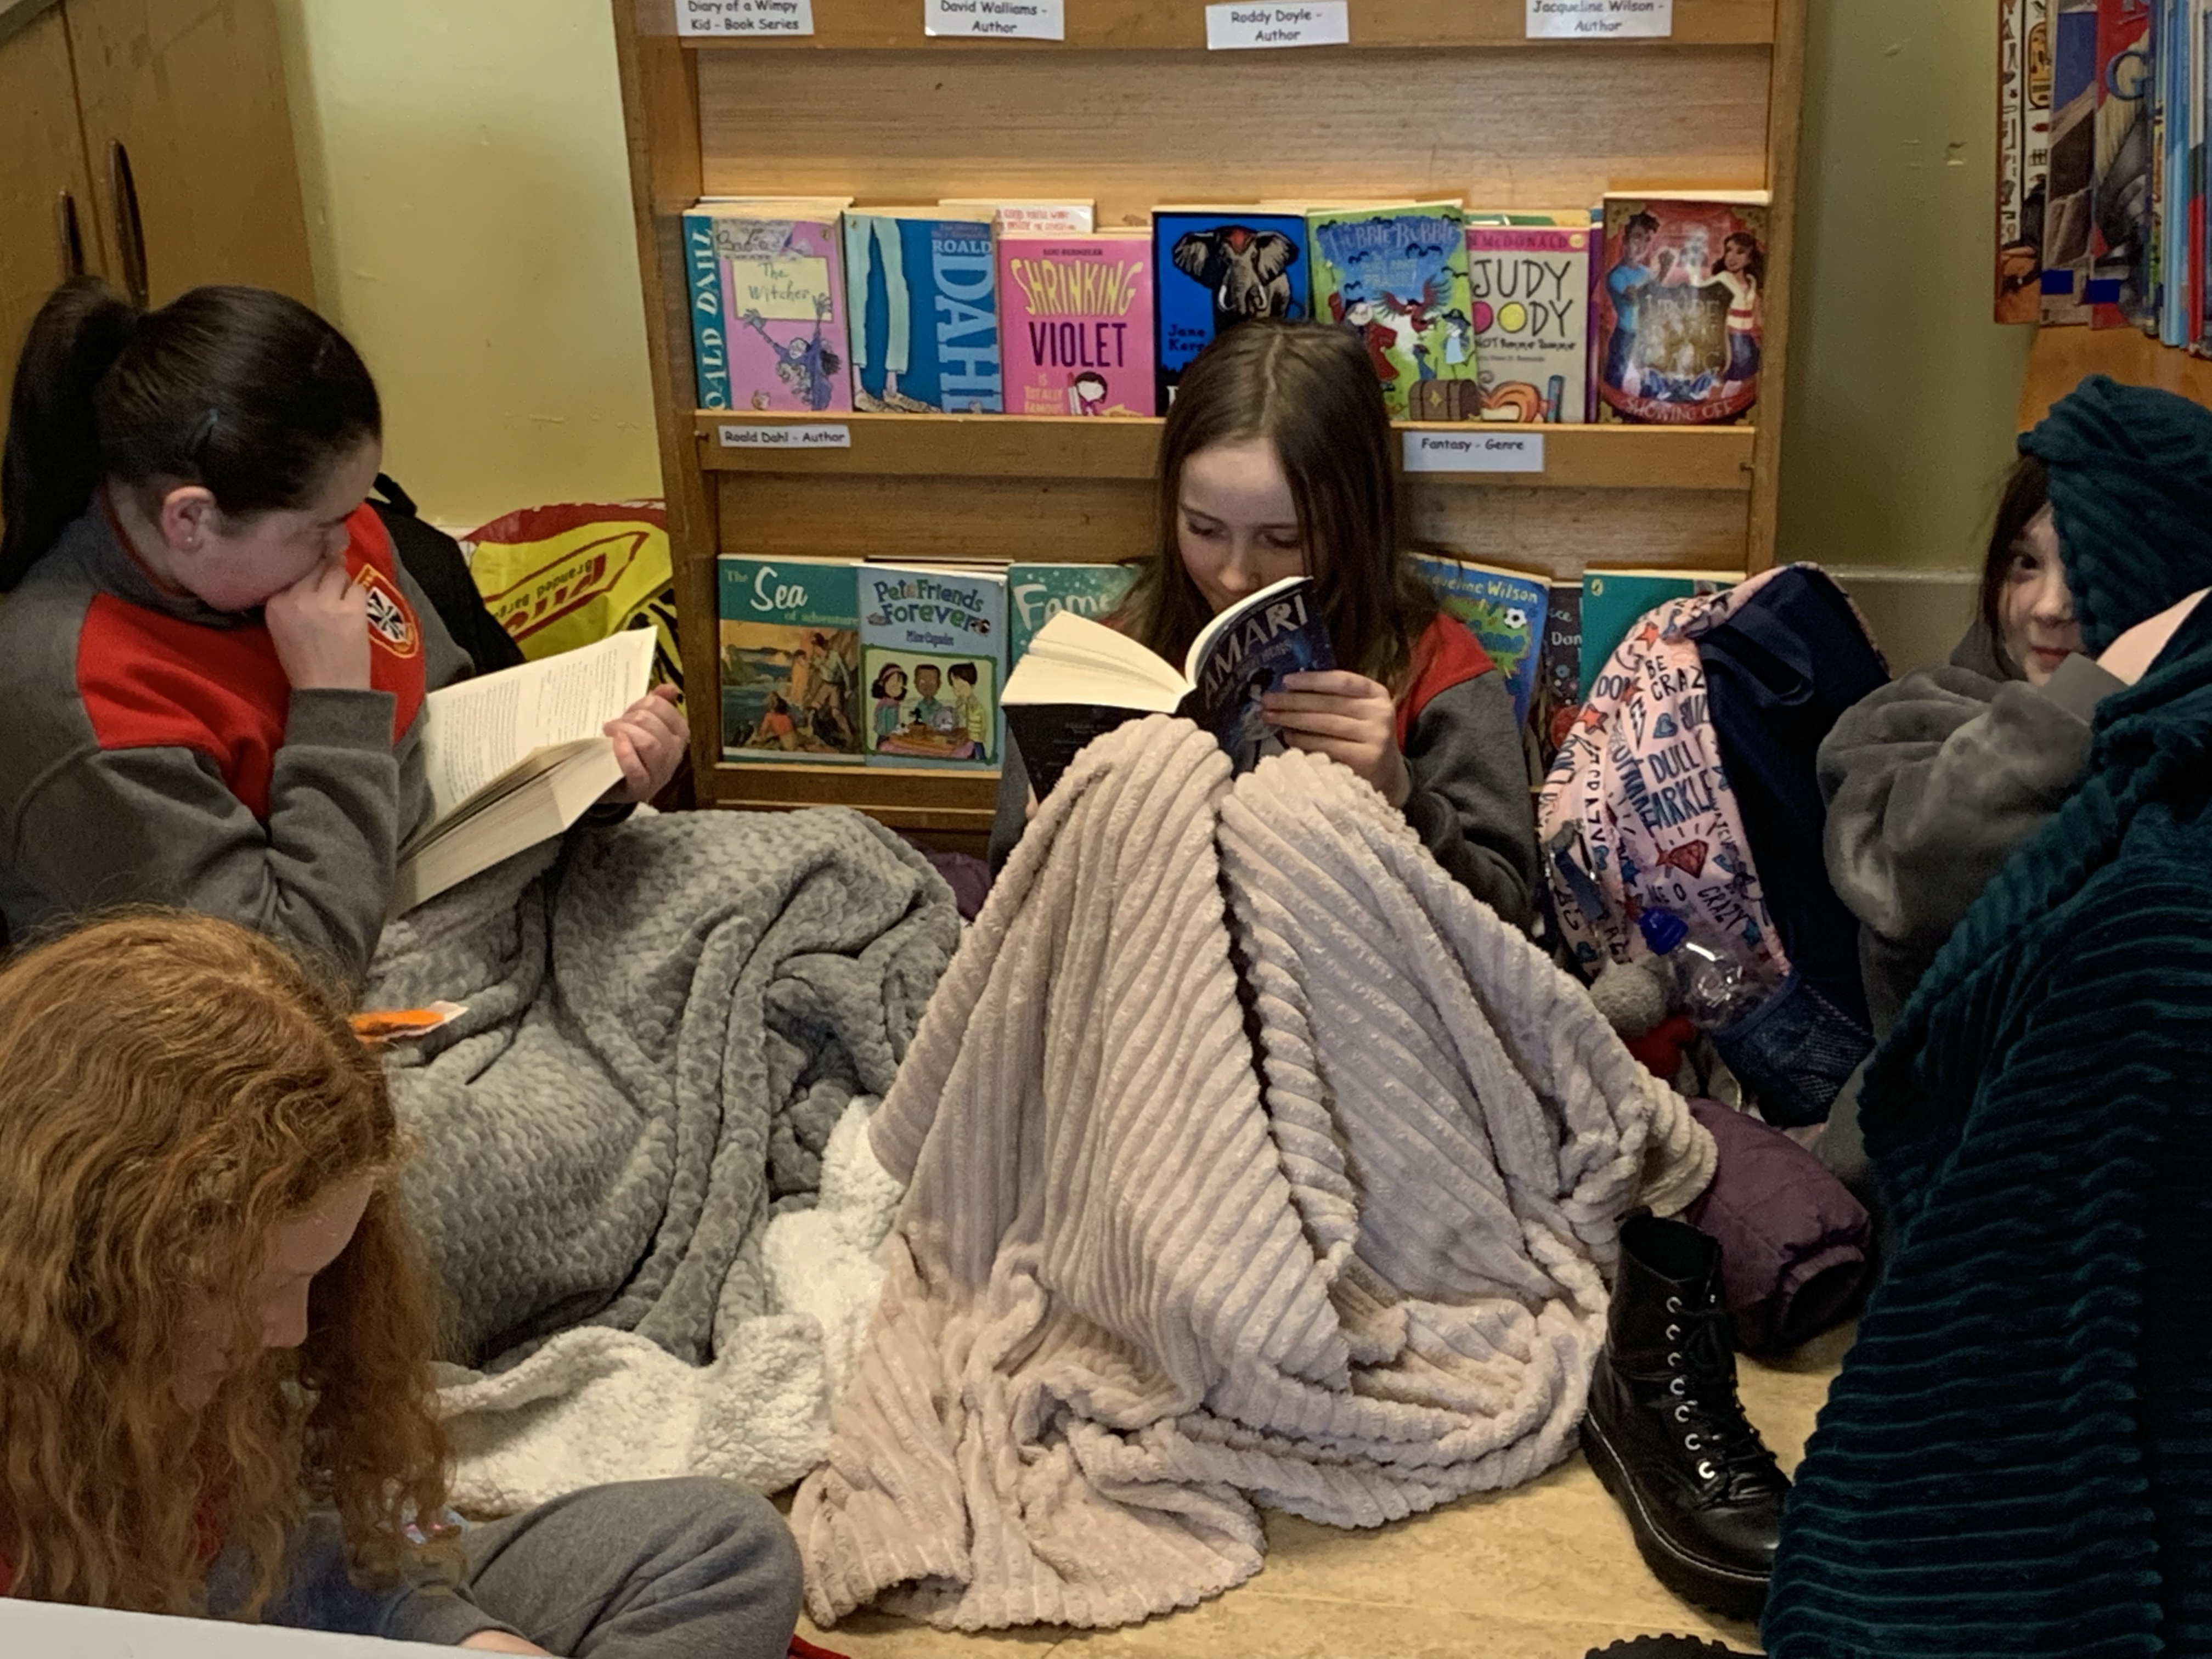 These girls are having fun in the reading room